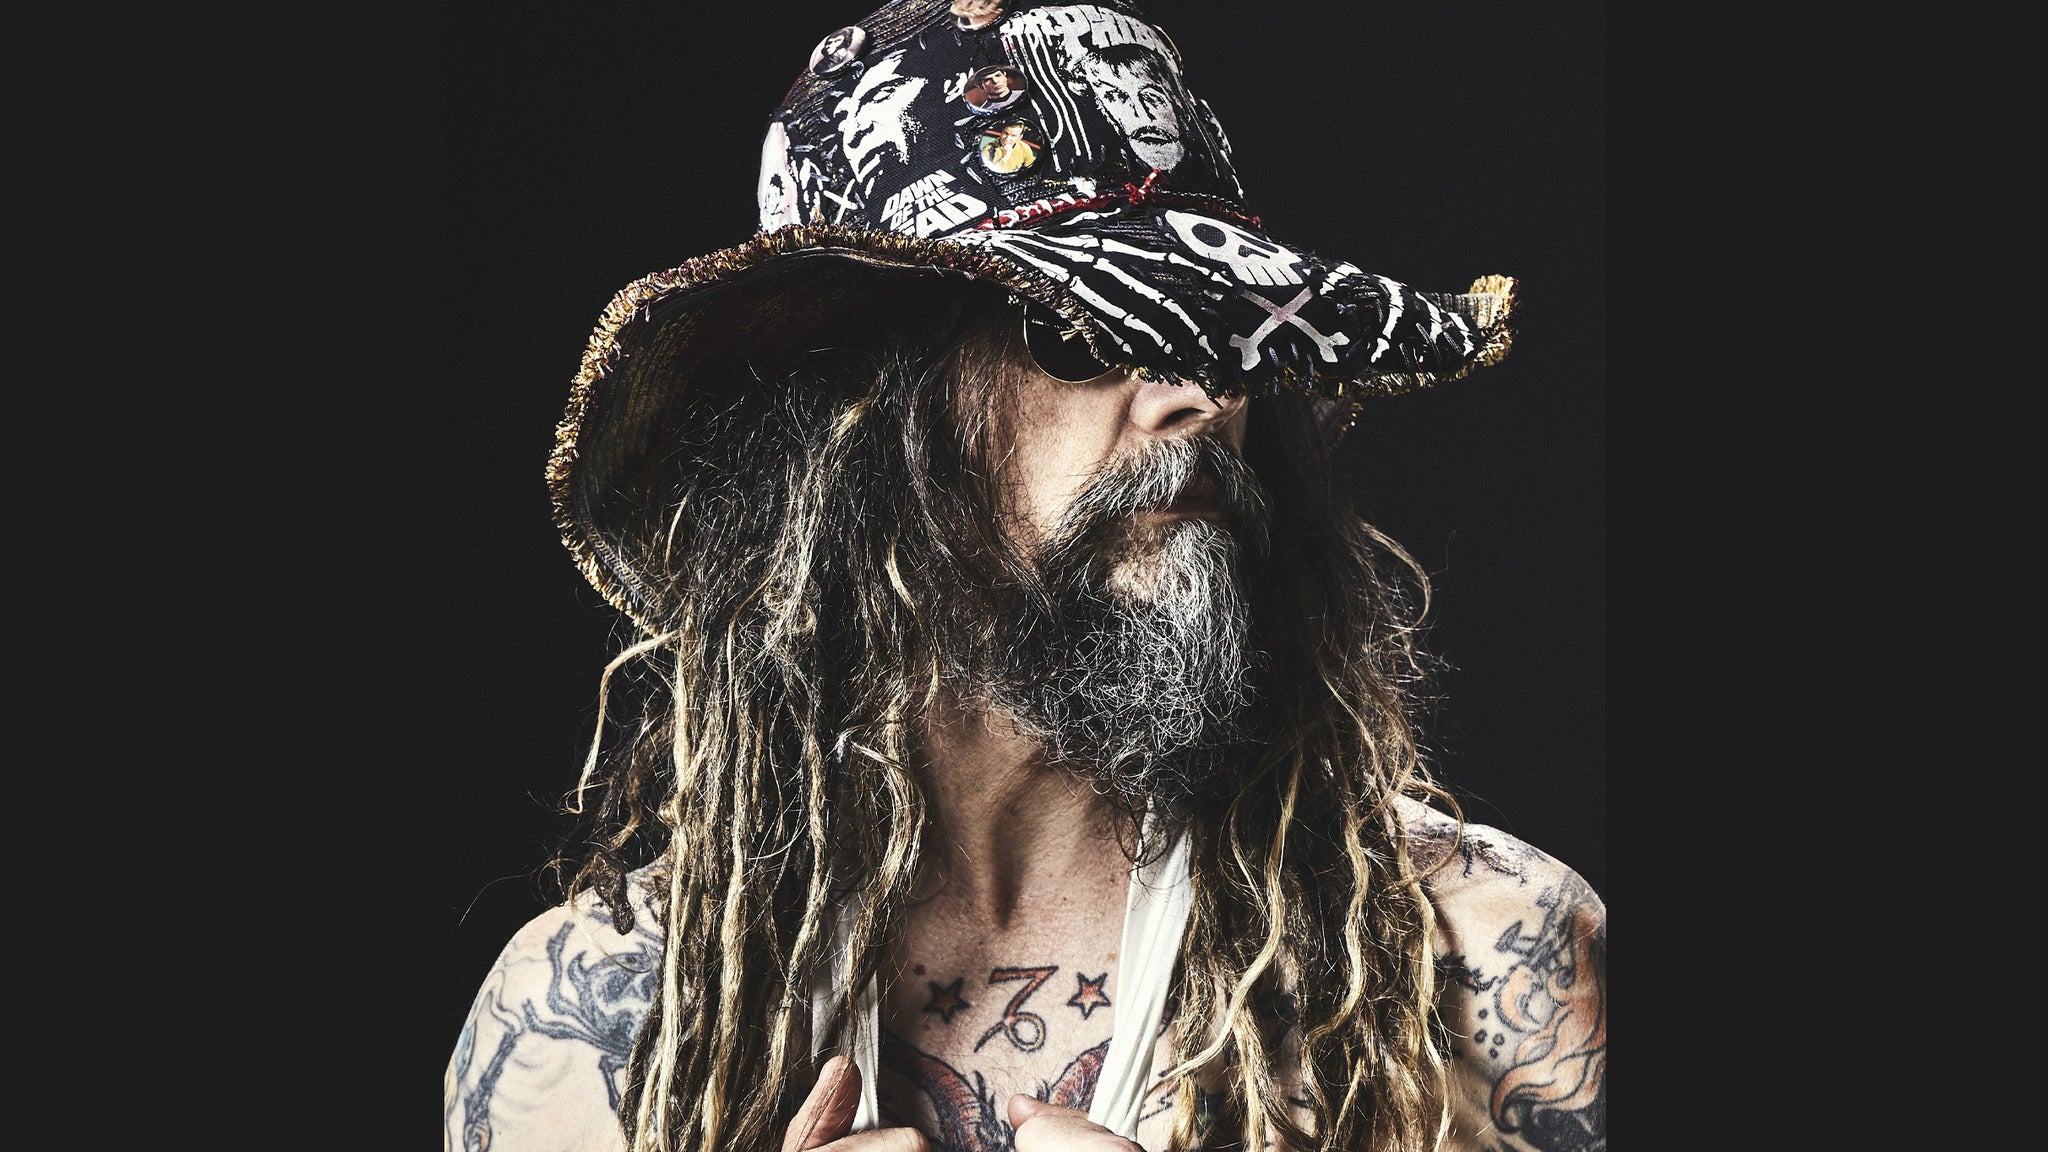 Rob Zombie and Alice Cooper: Freaks on Parade 2023 Tour